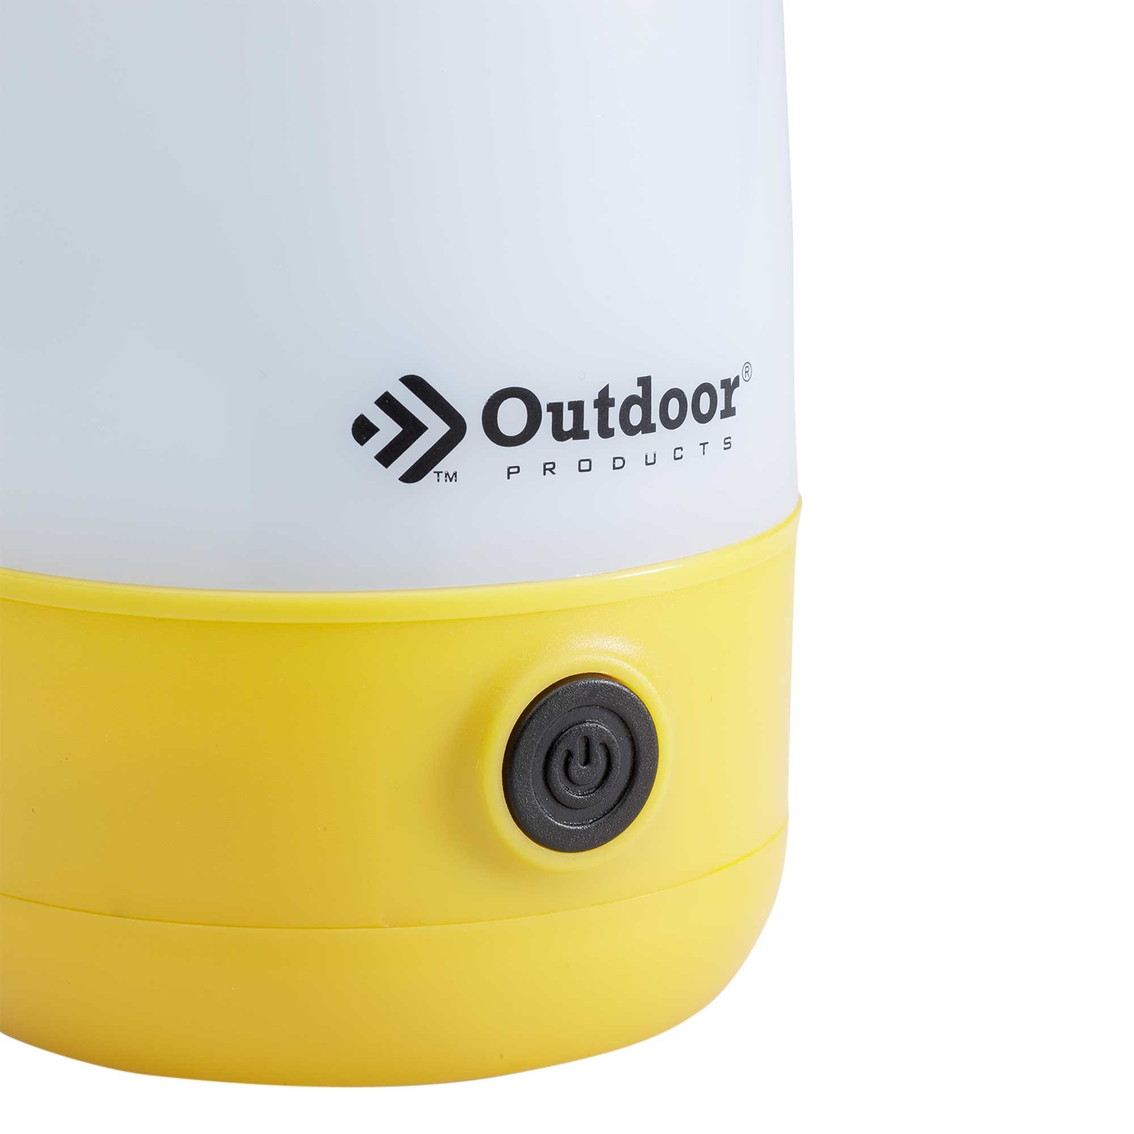 Outdoor Products 200L Compact Camp Lantern - Image 4 of 7